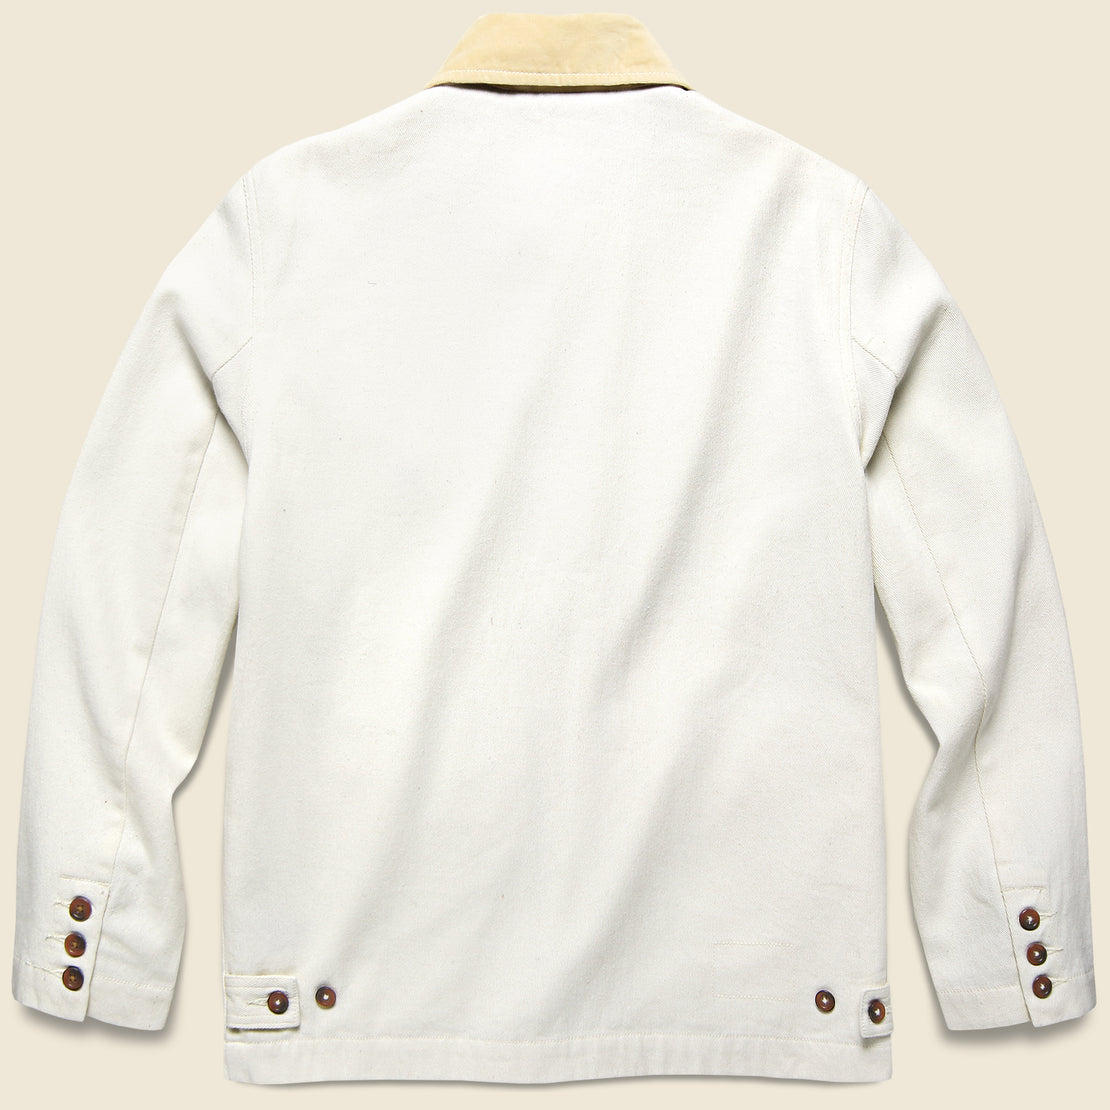 ES Jacket - Winter White - Universal Works - STAG Provisions - Outerwear - Coat / Jacket